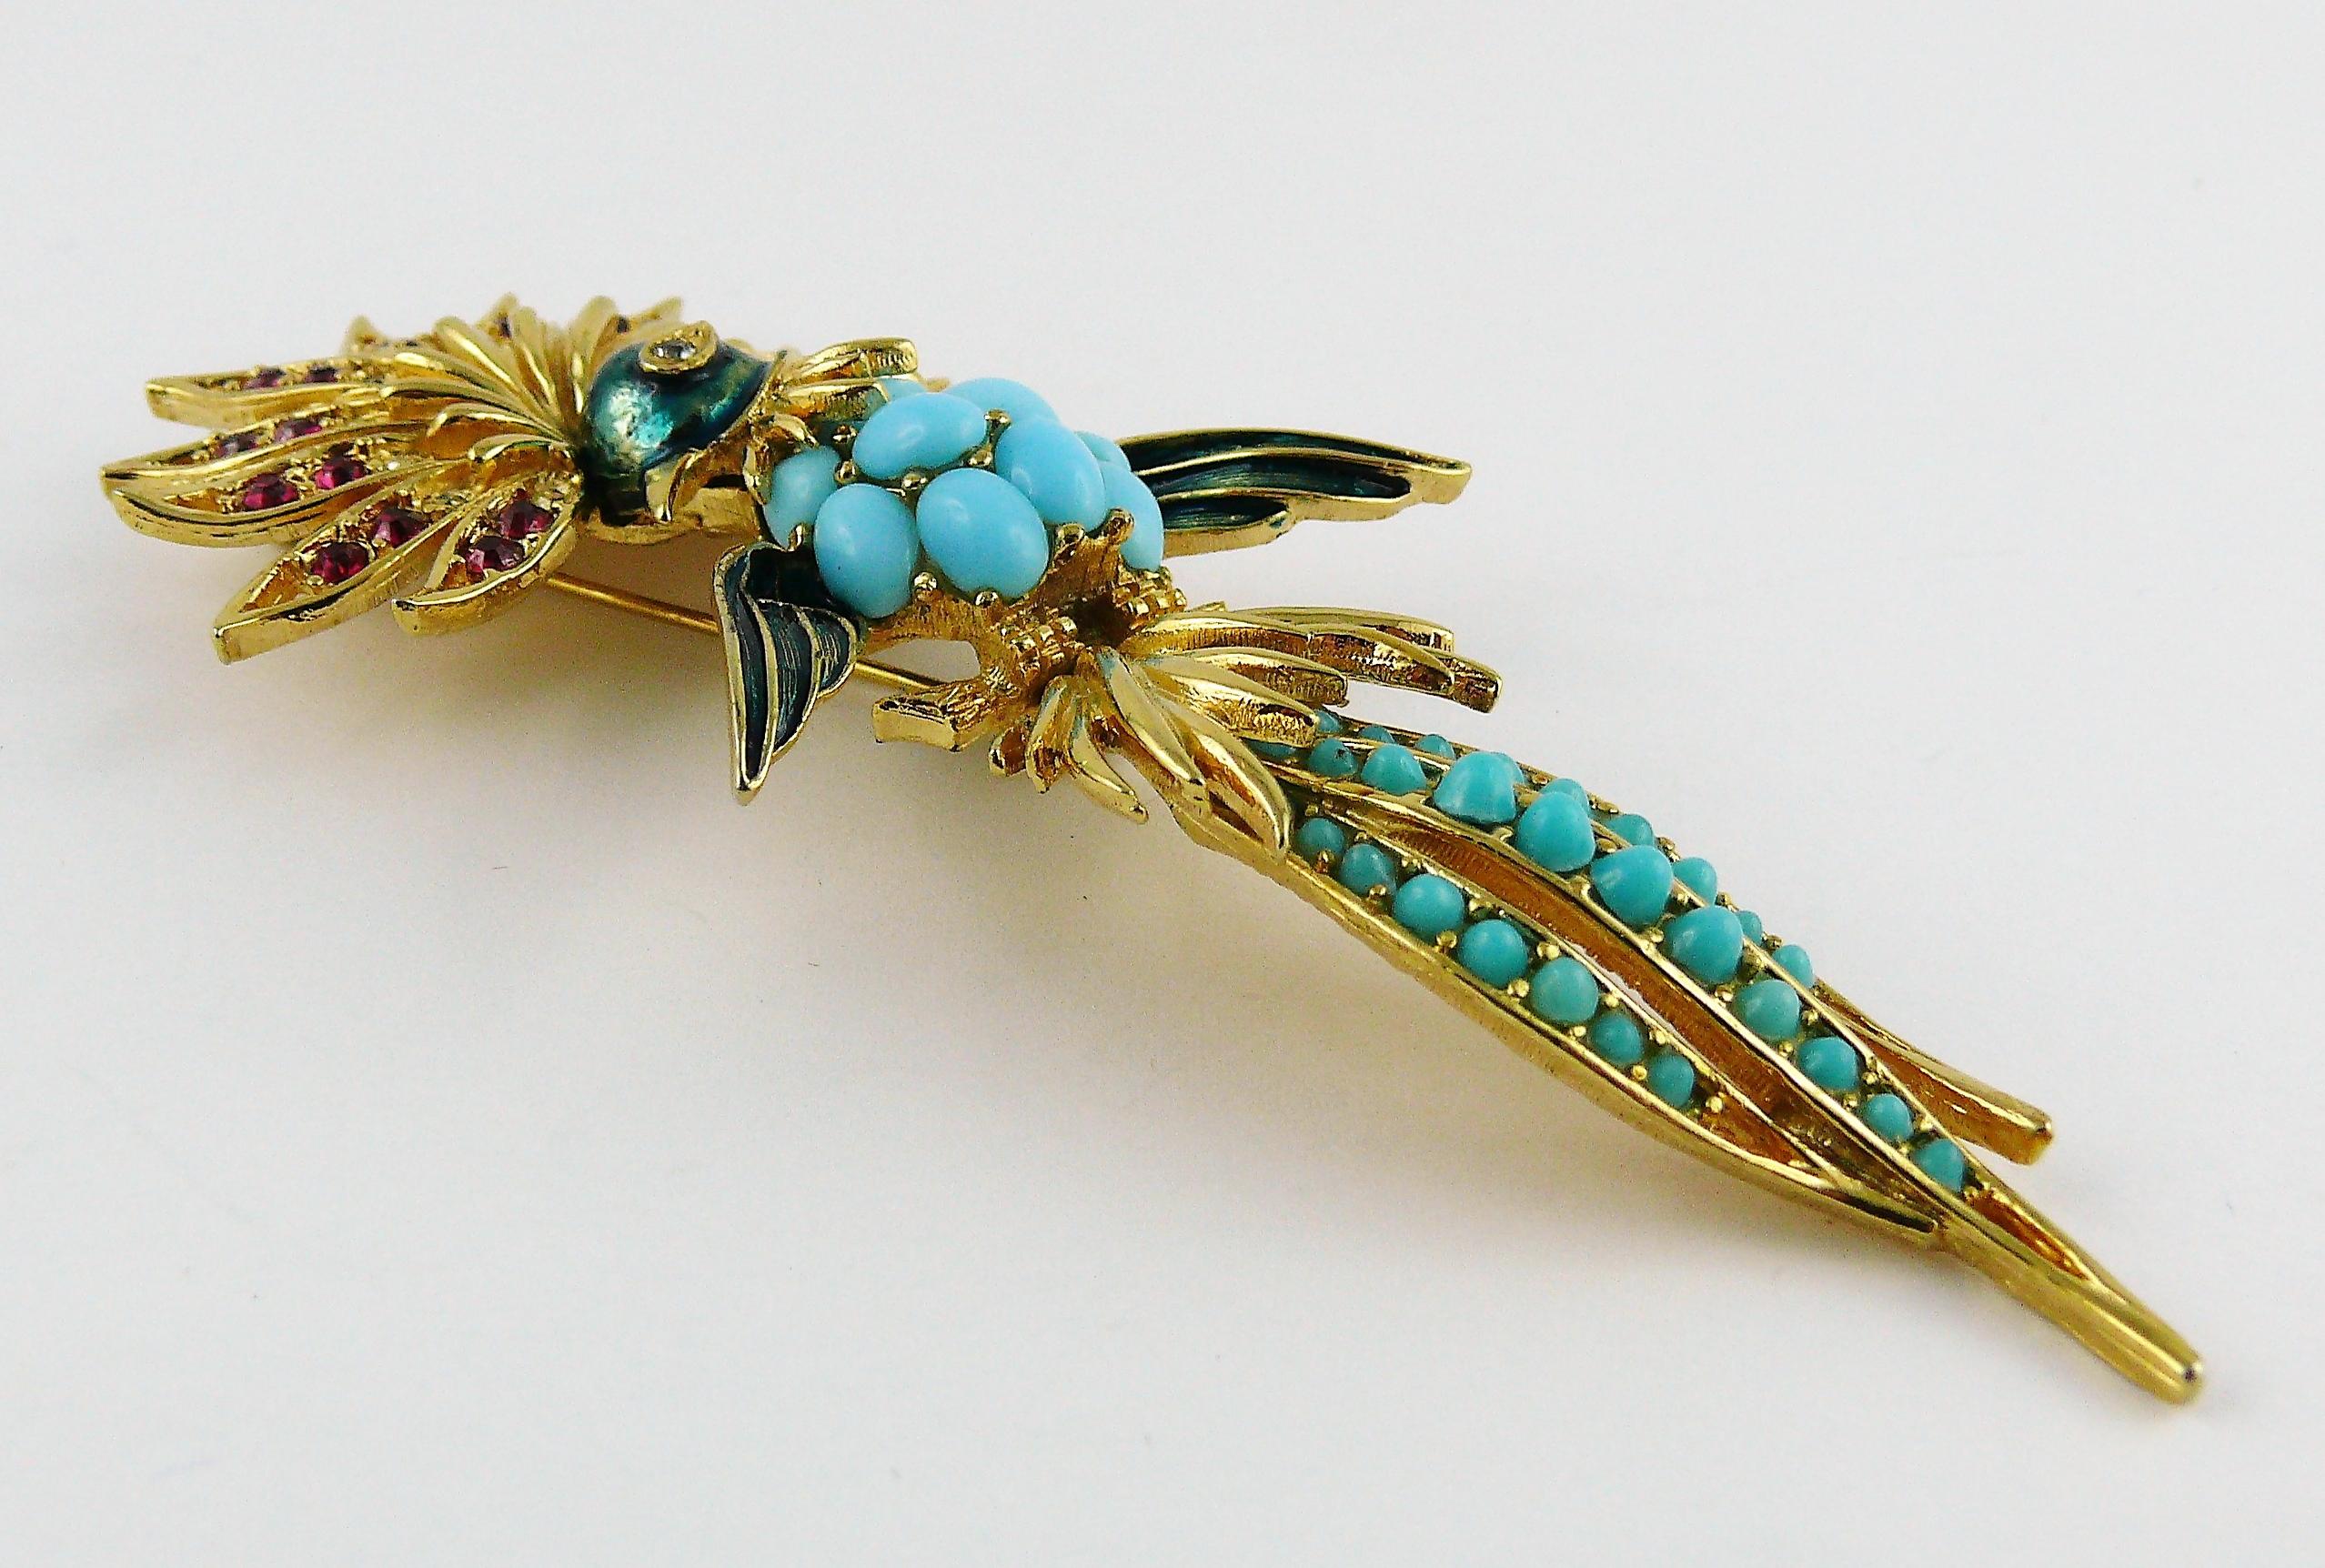 MARCEL BOUCHER gold toned bird of paradise brooch embellished with ruby rhinestones, clear crystals, faux turquoise cabochons and enamel.

Embossed BOUCHER.

Indicative measurements : max. height approx. 9.9 cm (3.90 inch) / max. width approx. 4.2